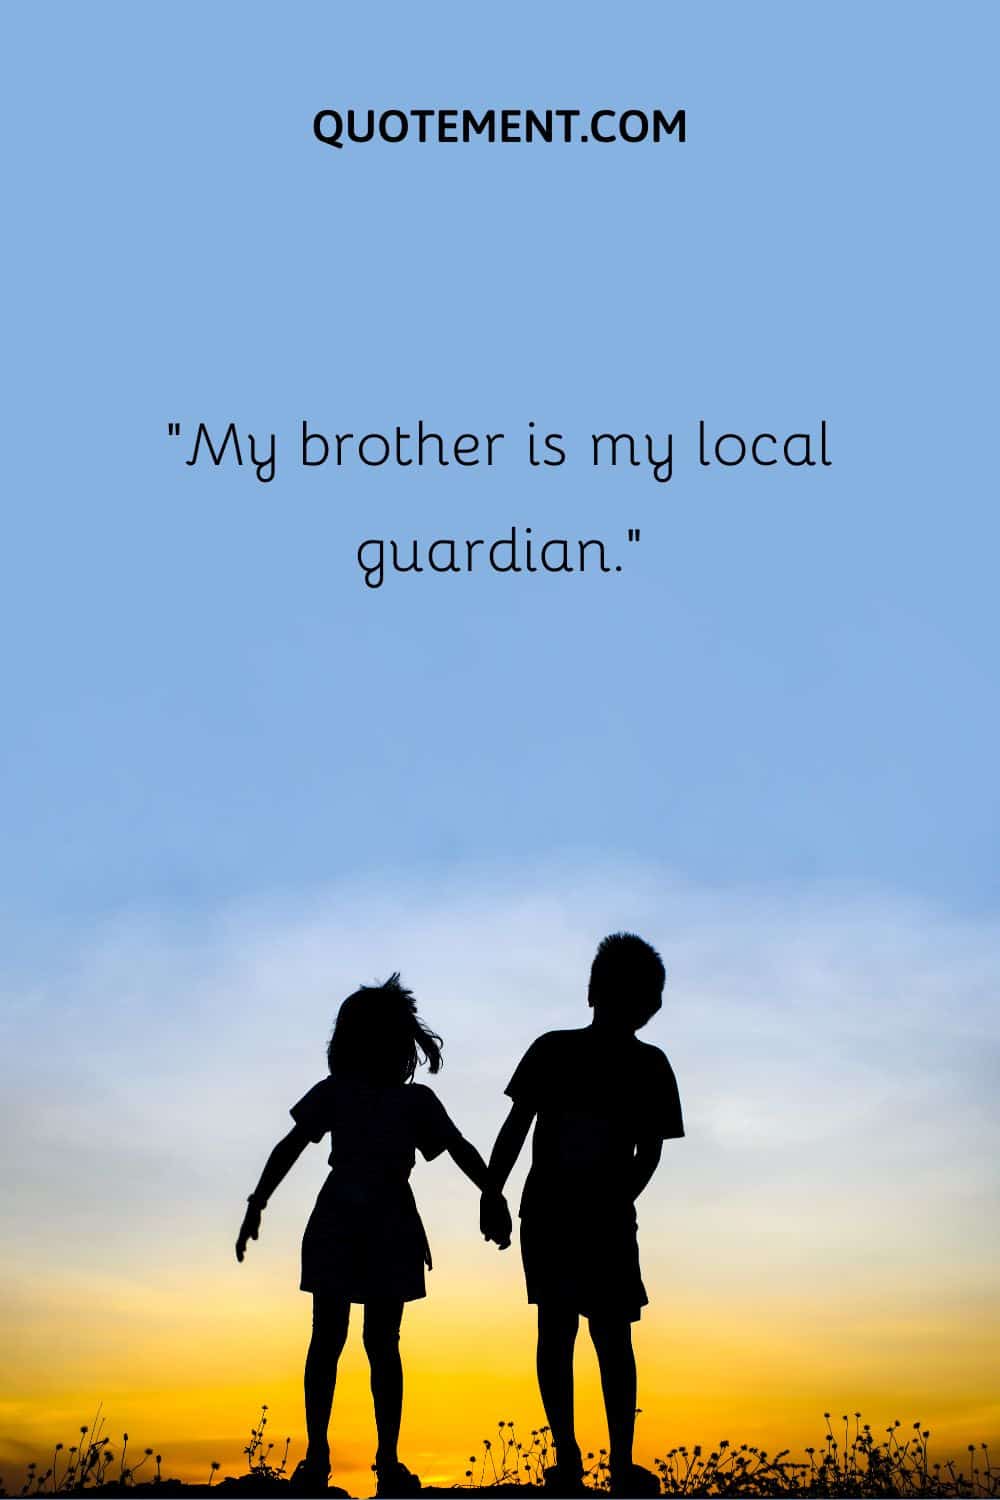 My brother is my local guardian.